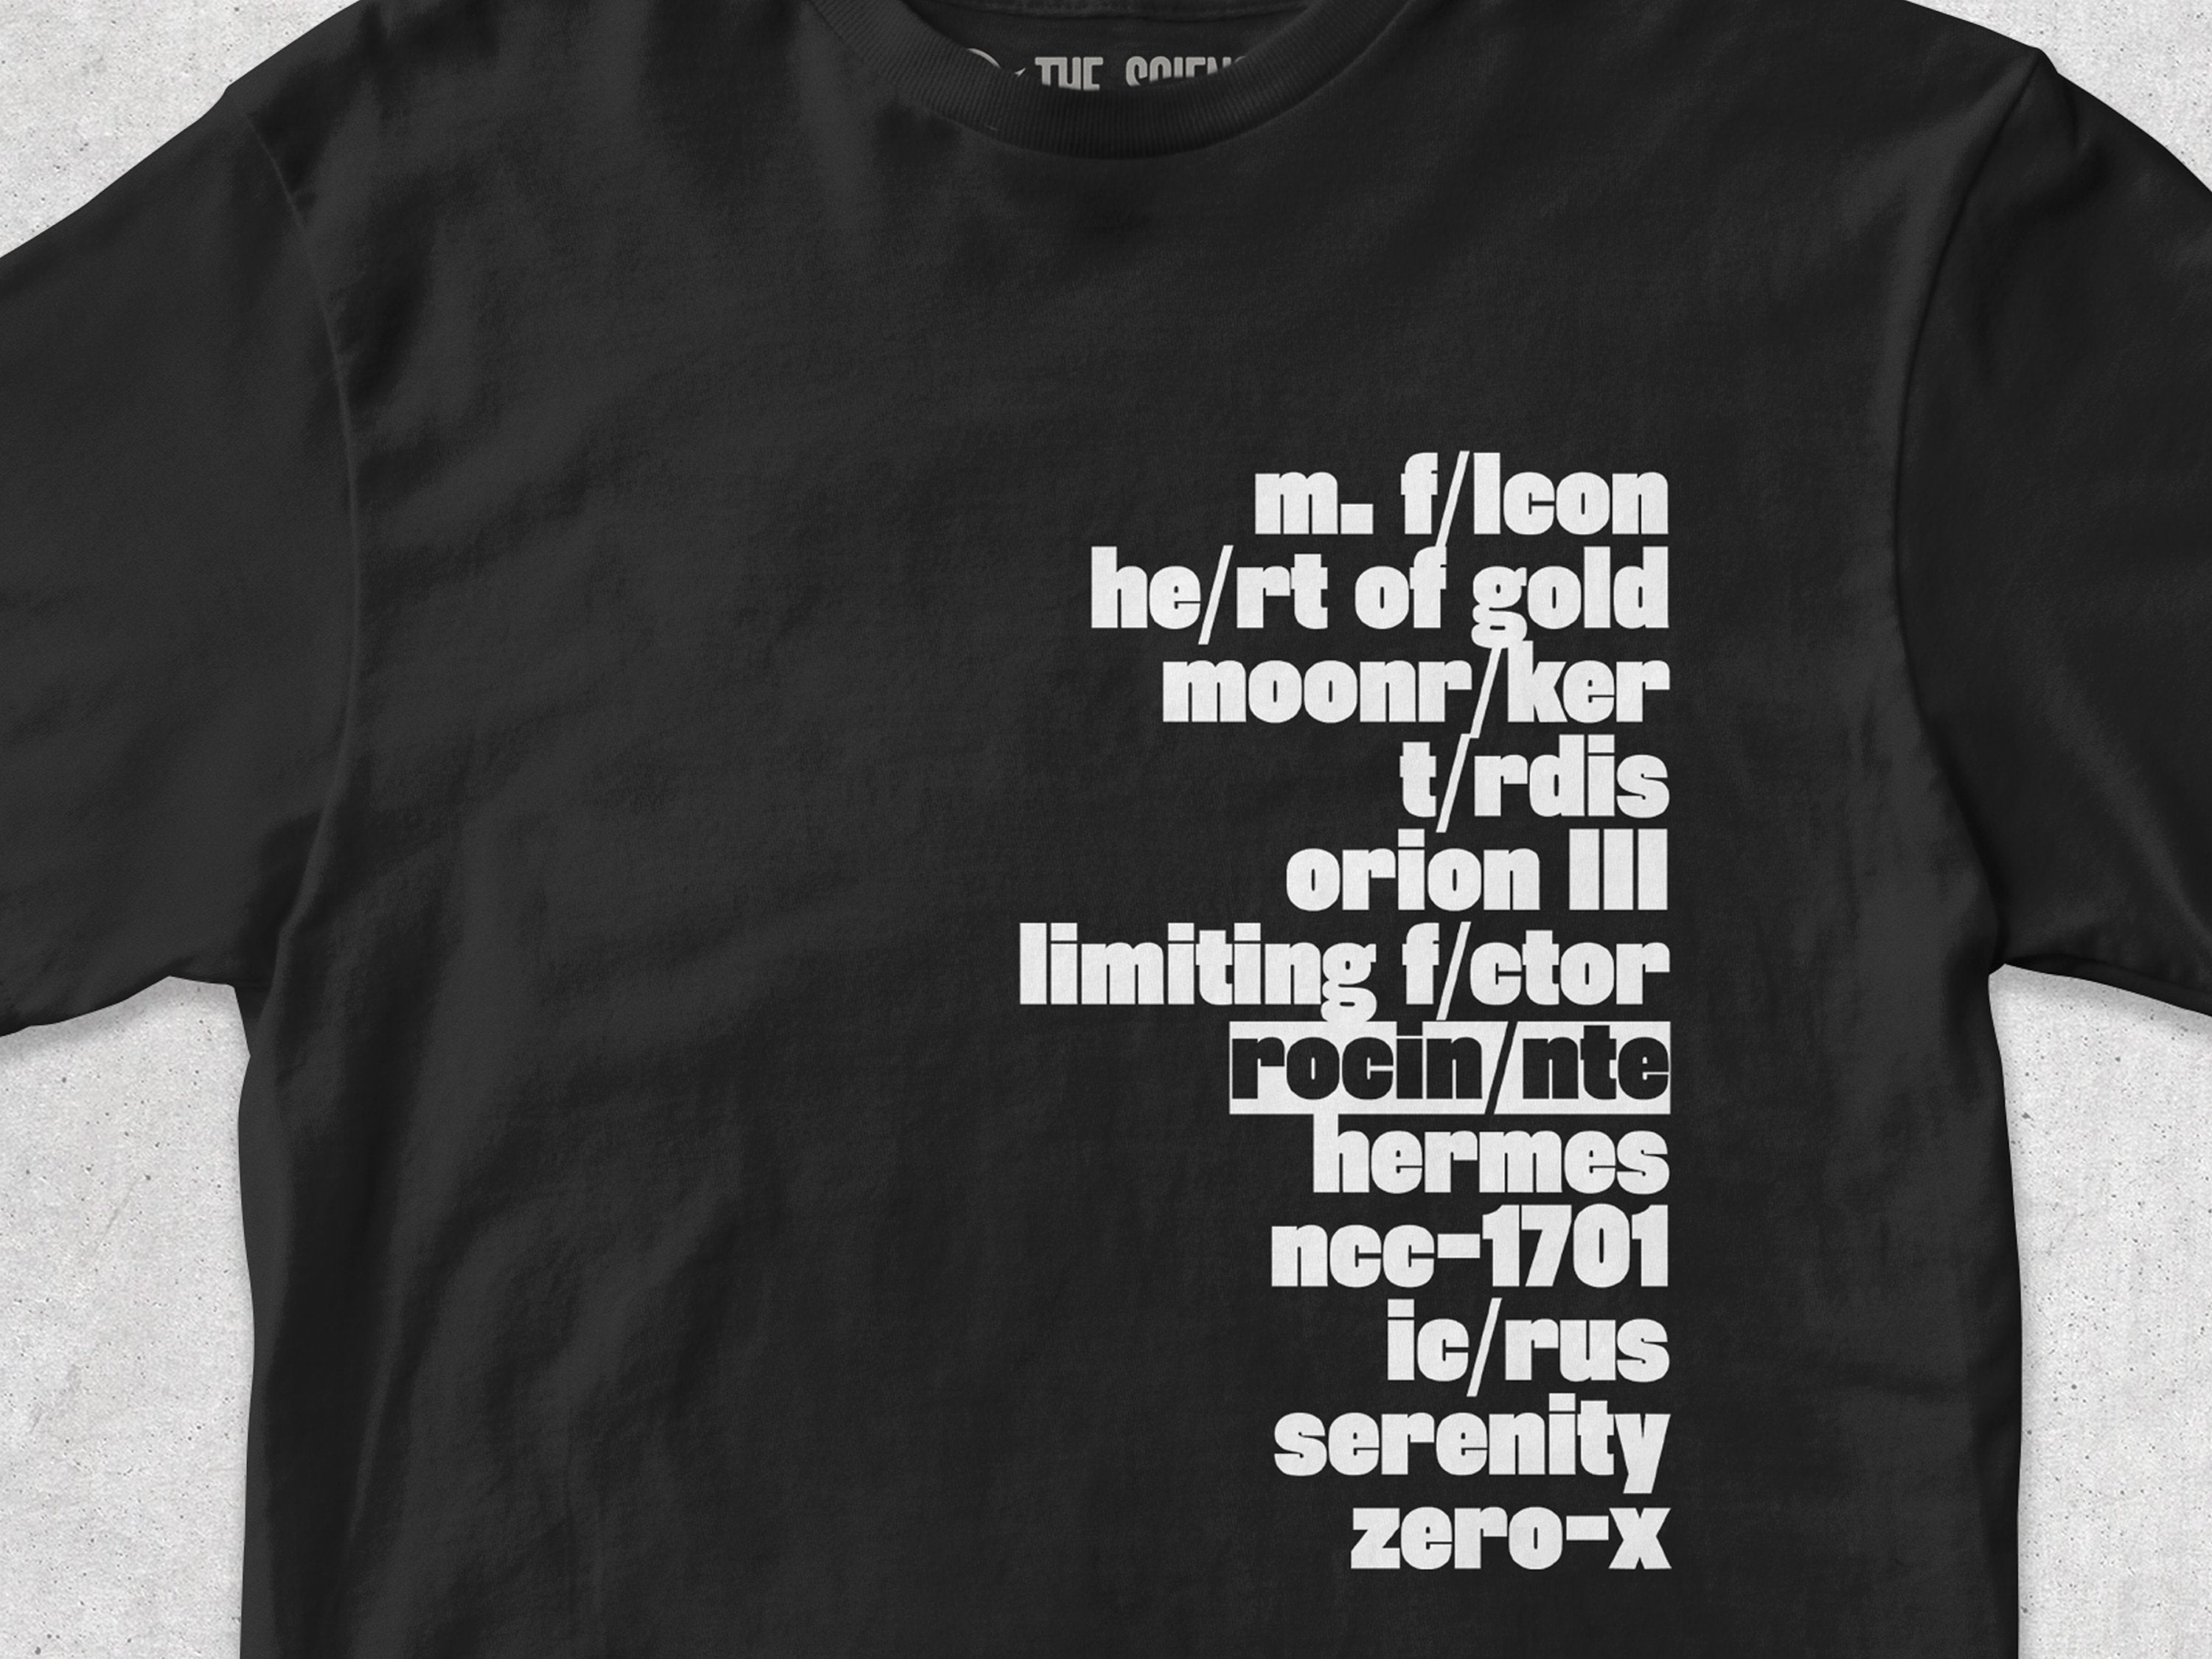 Personalized Sci-Fi Ships T-Shirt - Culture Series, HHGTTG, Expanse - Tees for Nerds